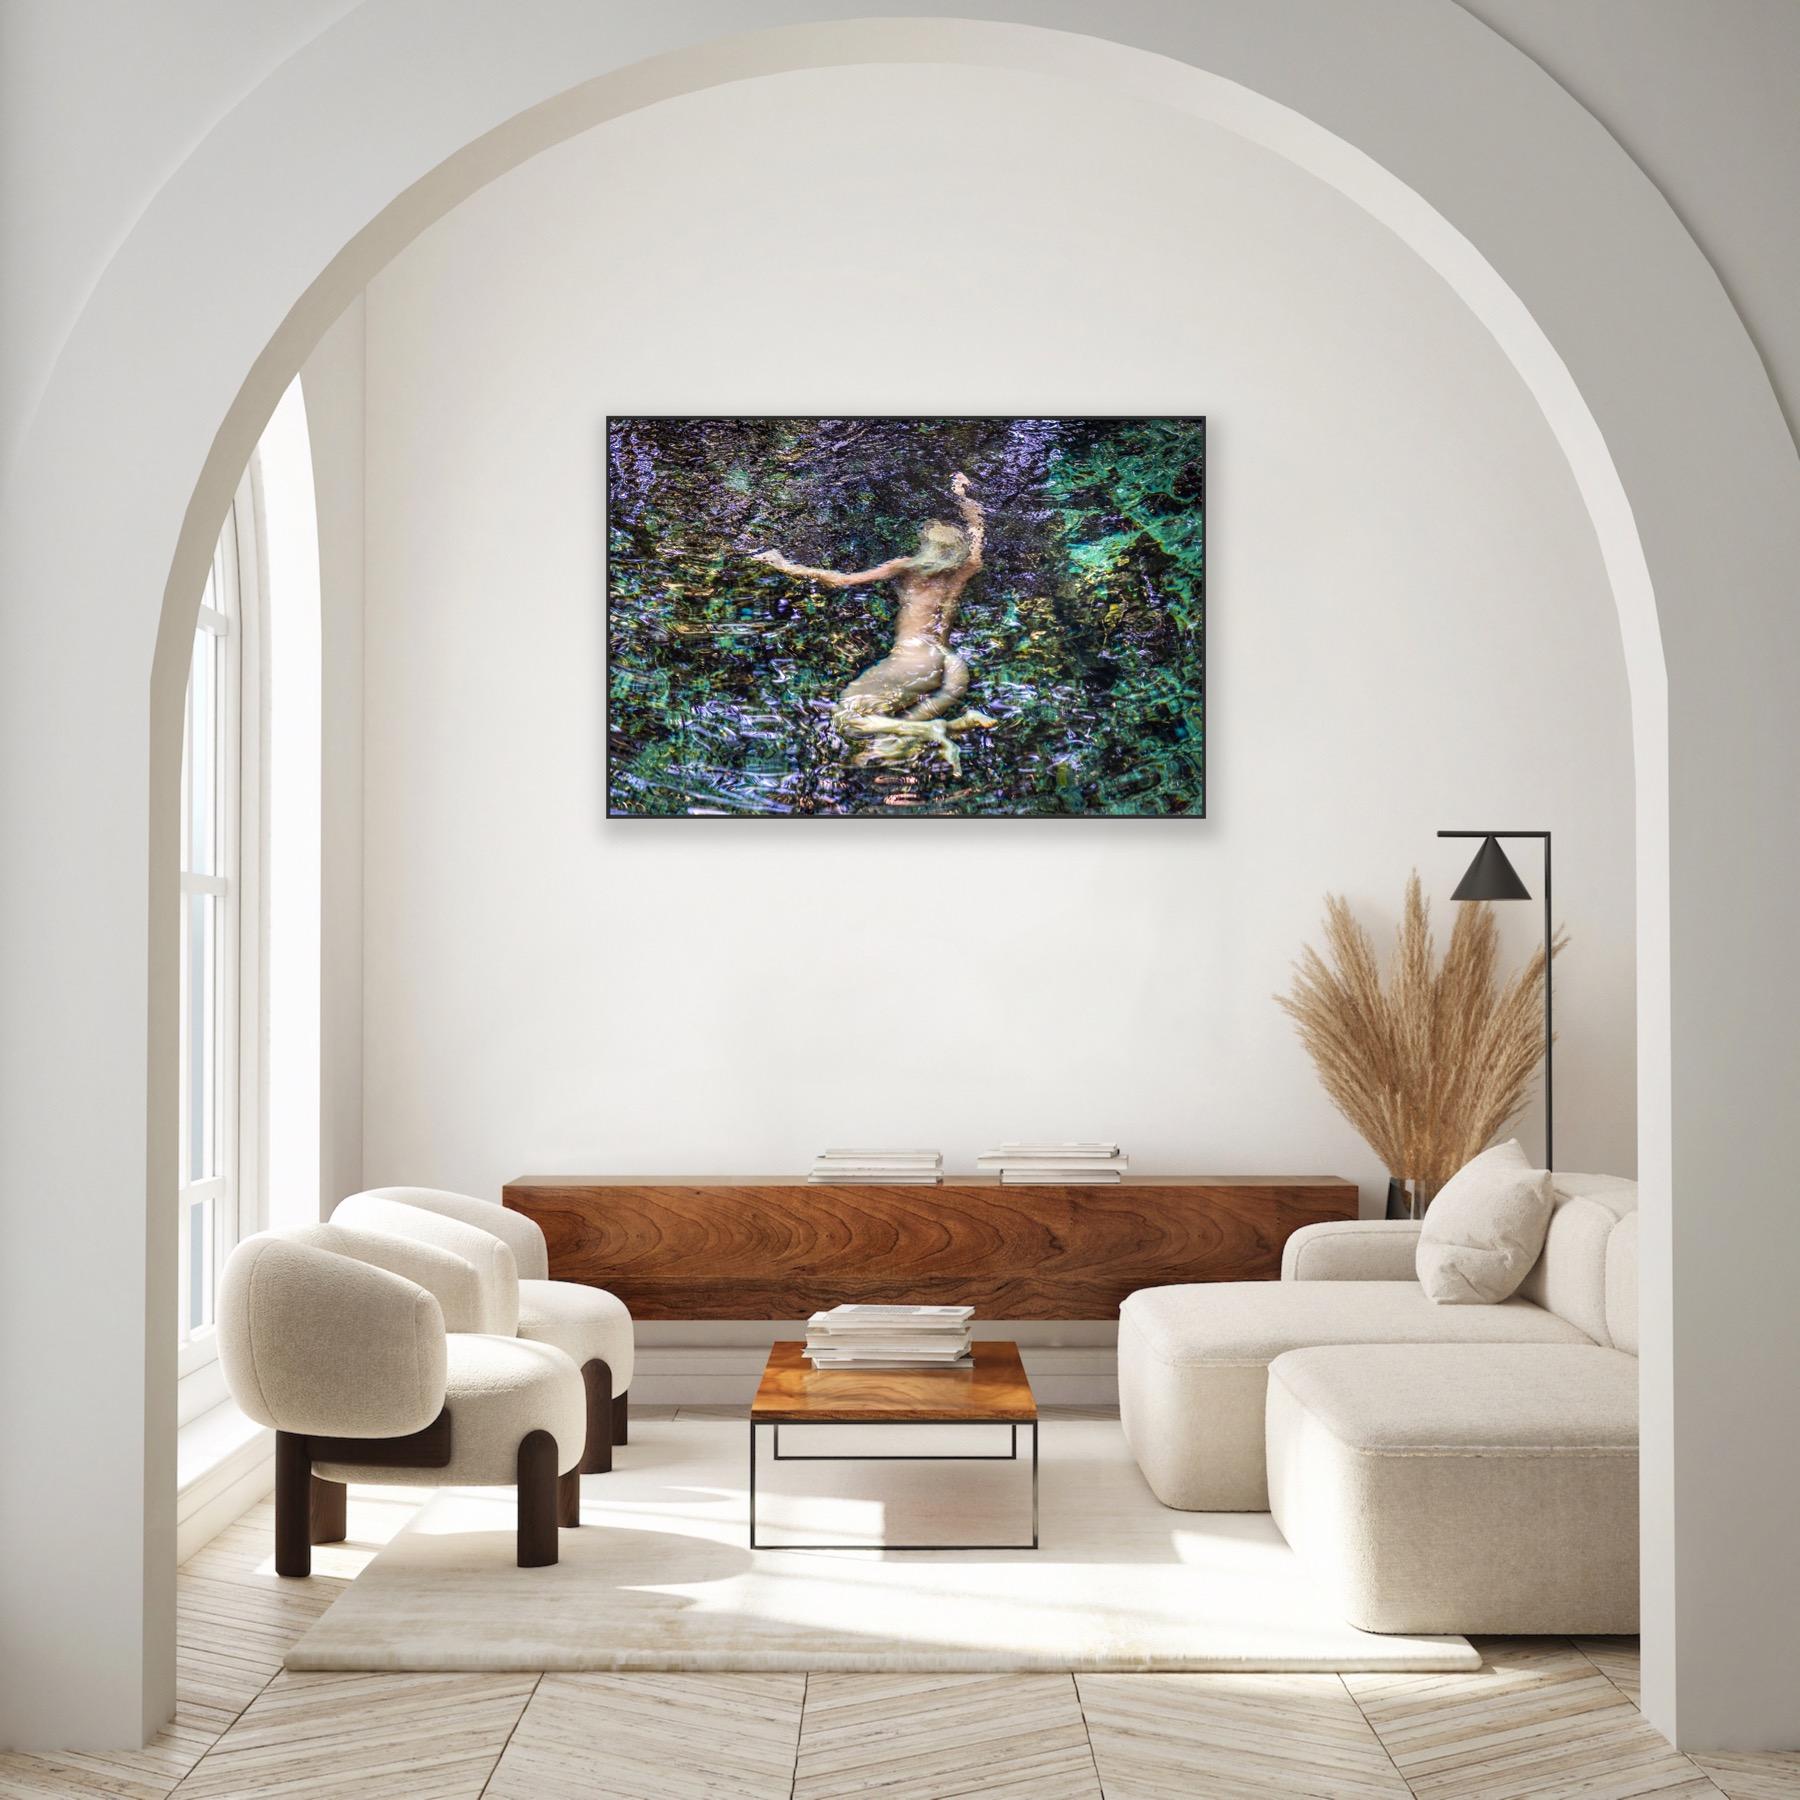 Shot in a cenote in Tulum, Mexico.

Fine art photo mounted on di-bond aluminum. Custom printing/mounting/framing options available upon request. 